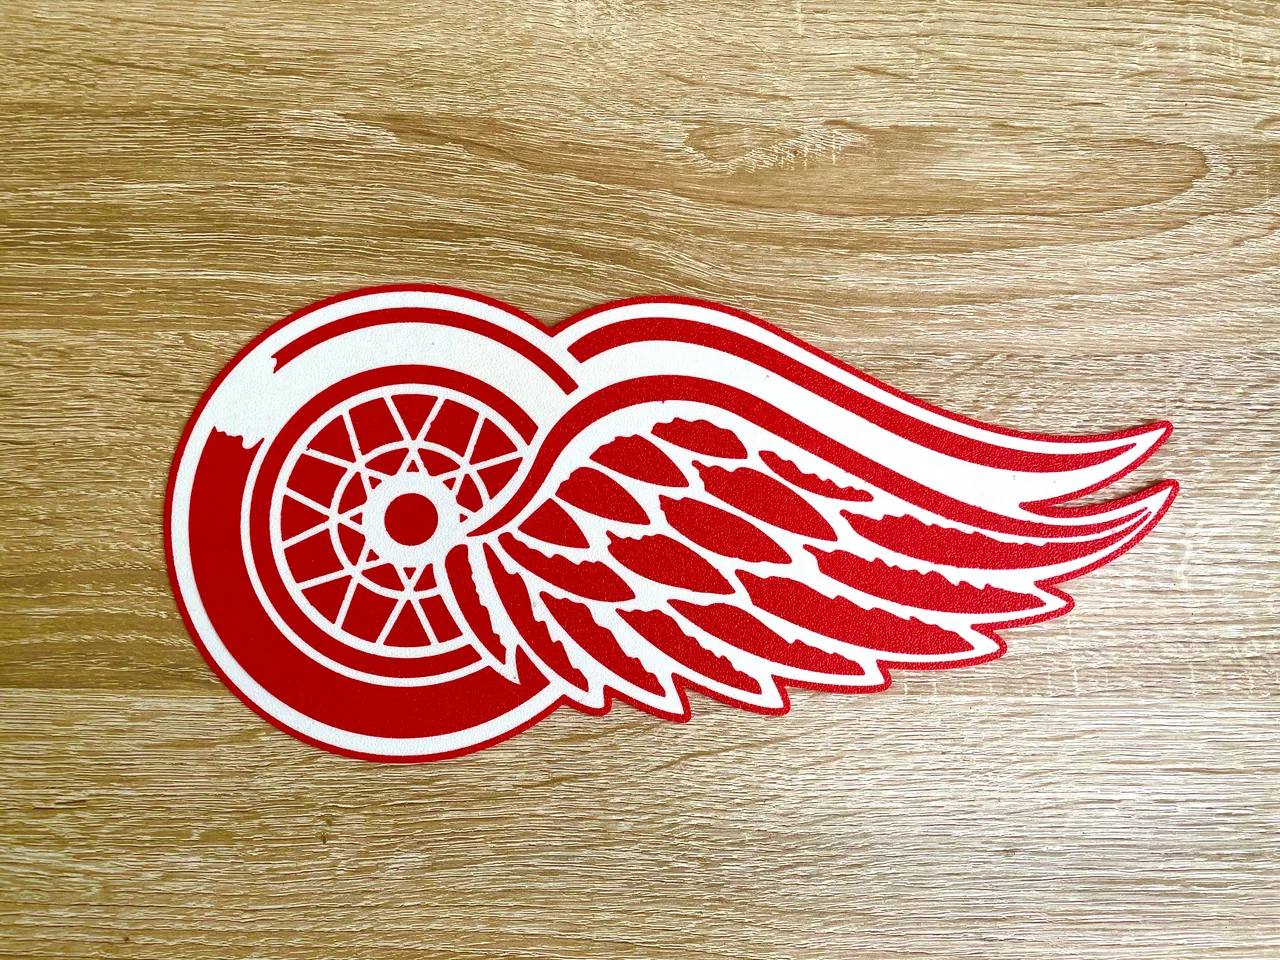 Detroit Red Wings -Patch - Iron On